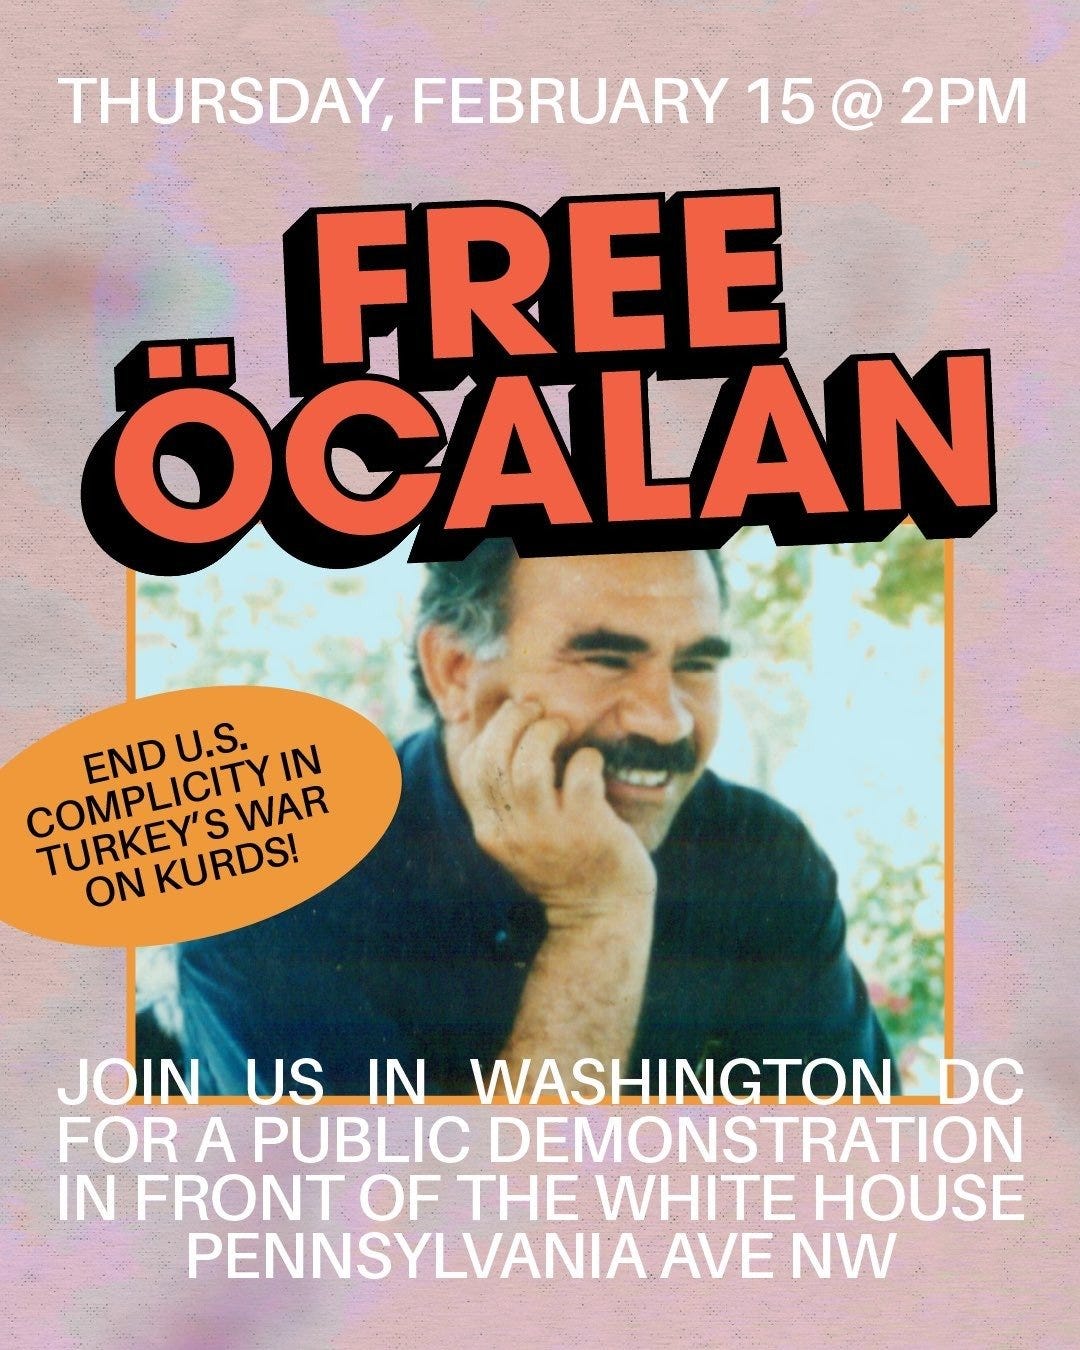 Flyer for Free Öcalan rally on a mottled pink and light blue background. At top in white text, "Thursday, February 15, 2024". Below, in large orange font with thick black shadow, "Free Öcalan" above a picture of Abdullah Öcalan smiling with tan skin, thick black eyebrows and mustache. Black text in an orange oval to the left of the photo: “End U.S. complicity in Turkey’s war on Kurds!” At bottom in white text: “Join us in Washington DC for a public demonstration in front of the White House, Pennsylvania Ave NW”